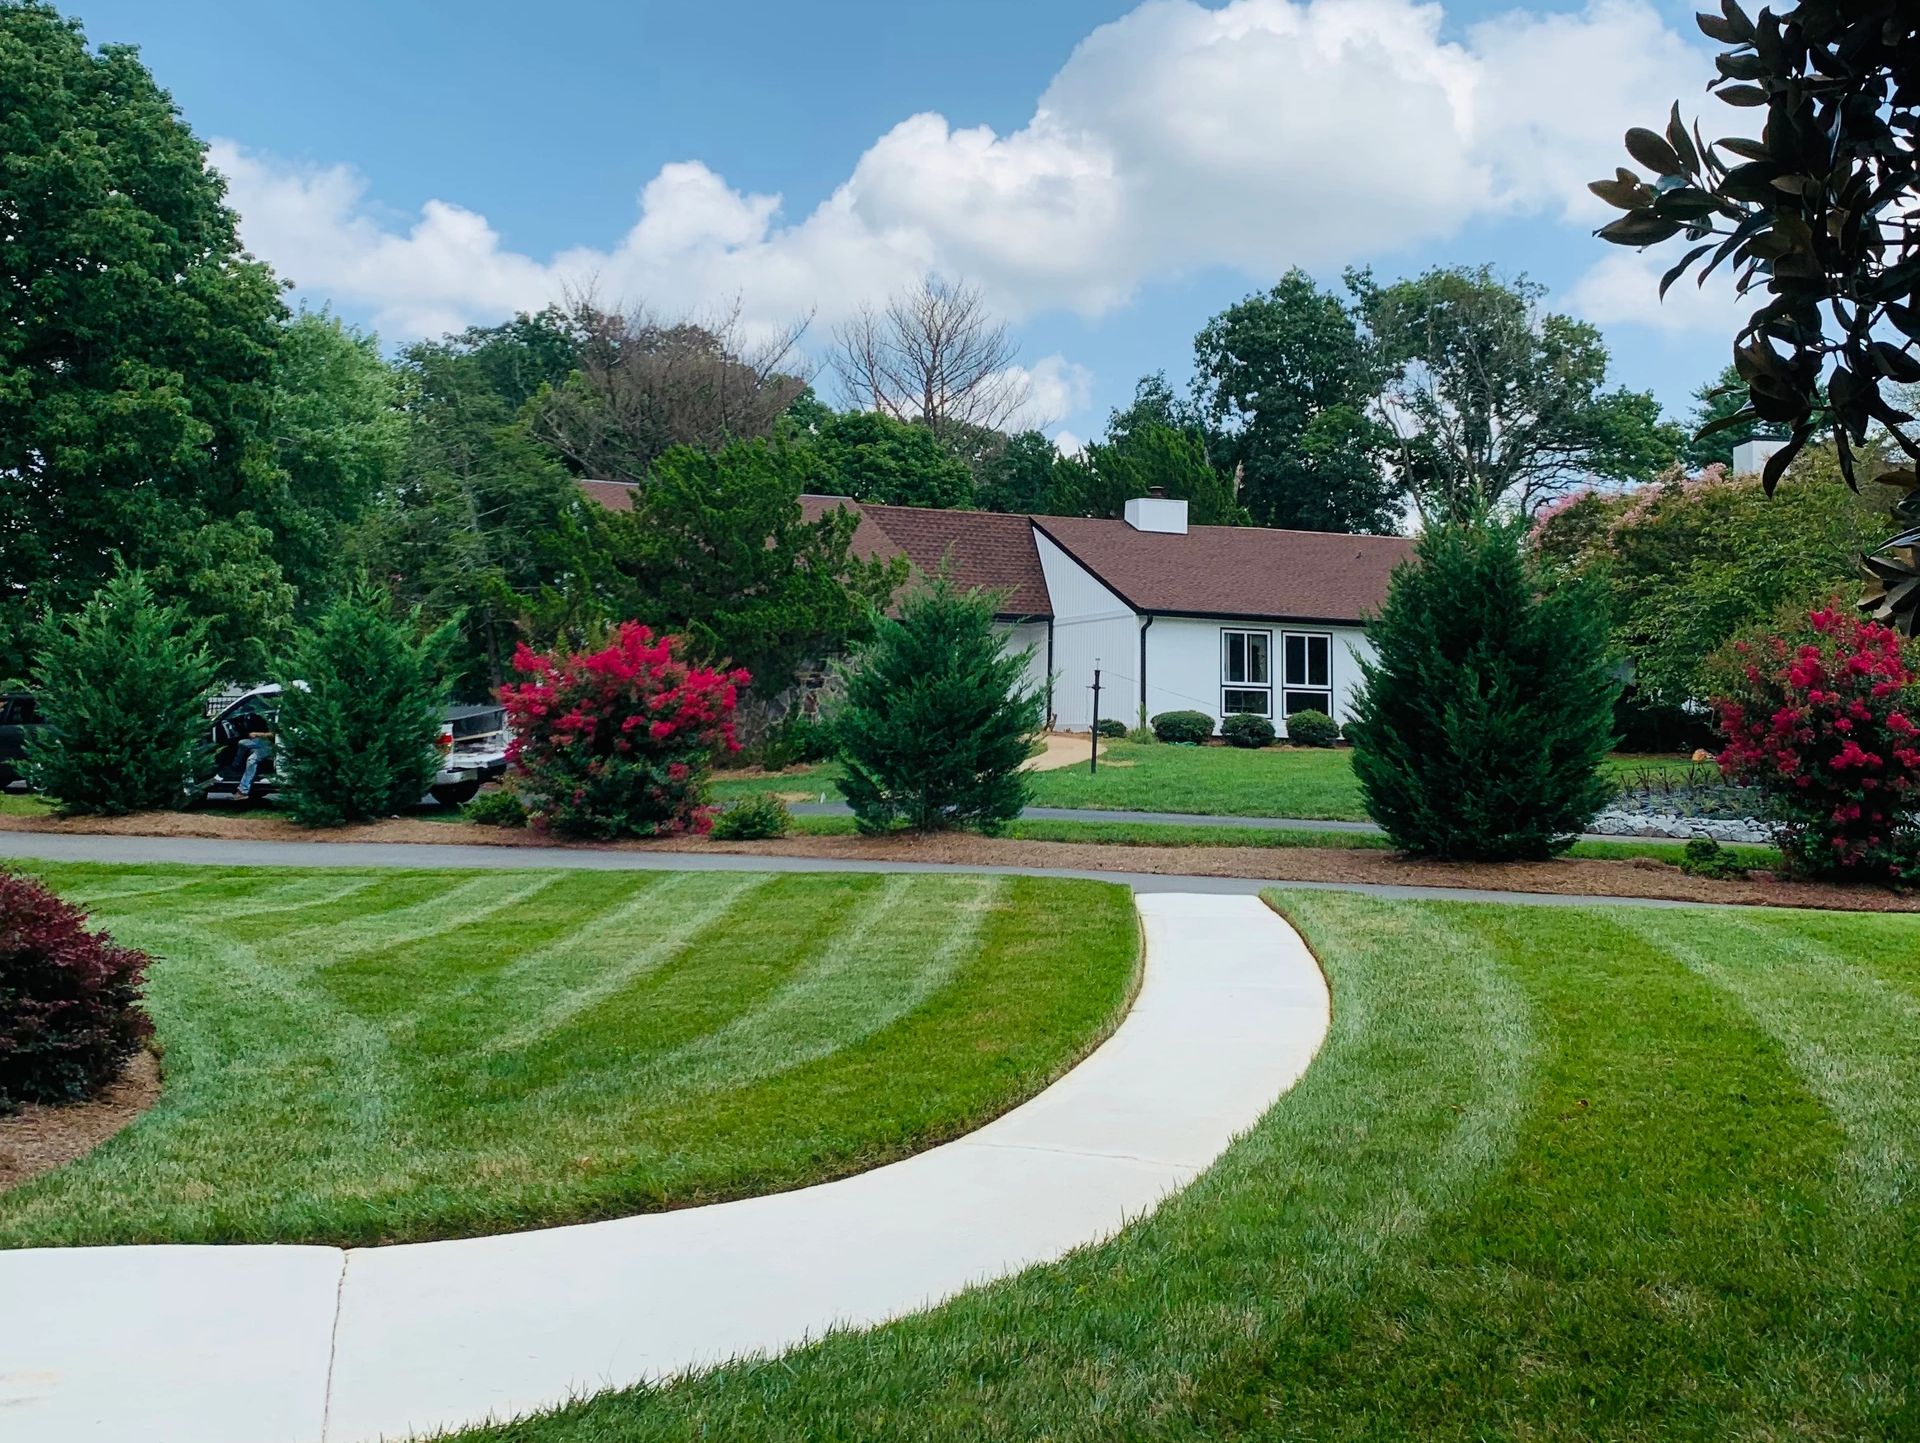 A well-manicured lawn with curved stripes leads to a white house with a brown roof